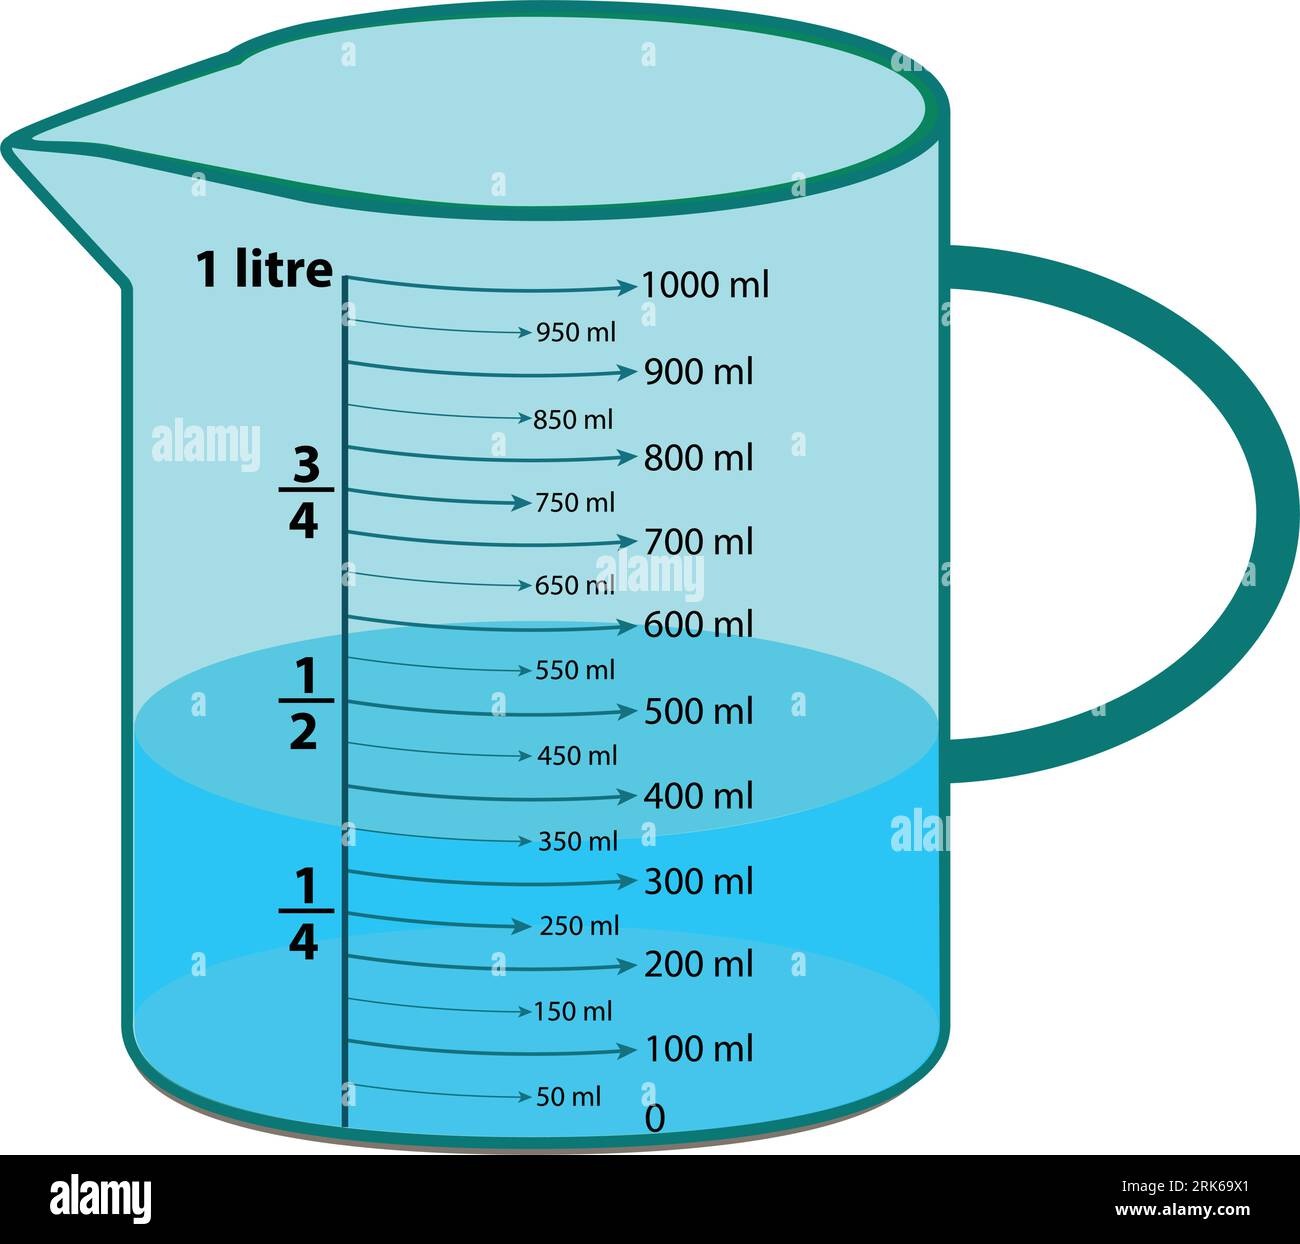 Scale measuring jug 1000ml. with measuring scale. Beaker for